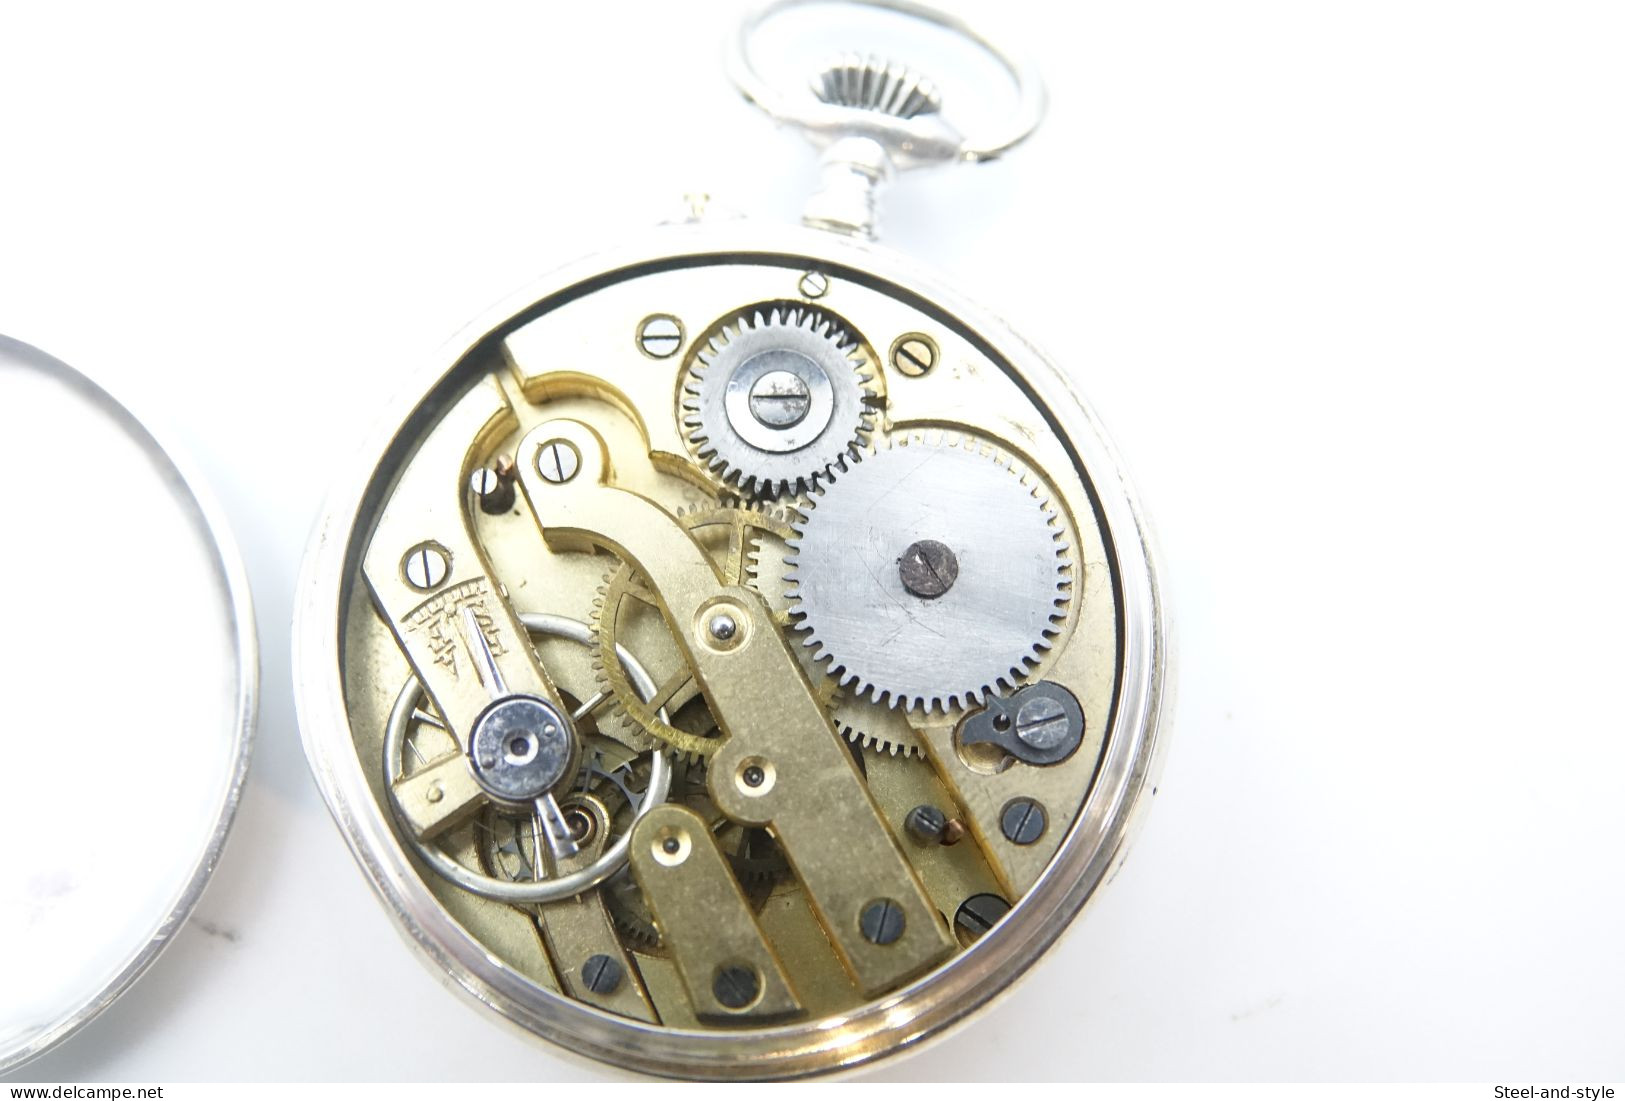 watches : POCKET WATCH SOLID SILVER CR & CIE 24 HOURS wide dial open face 1880-900's - original - running